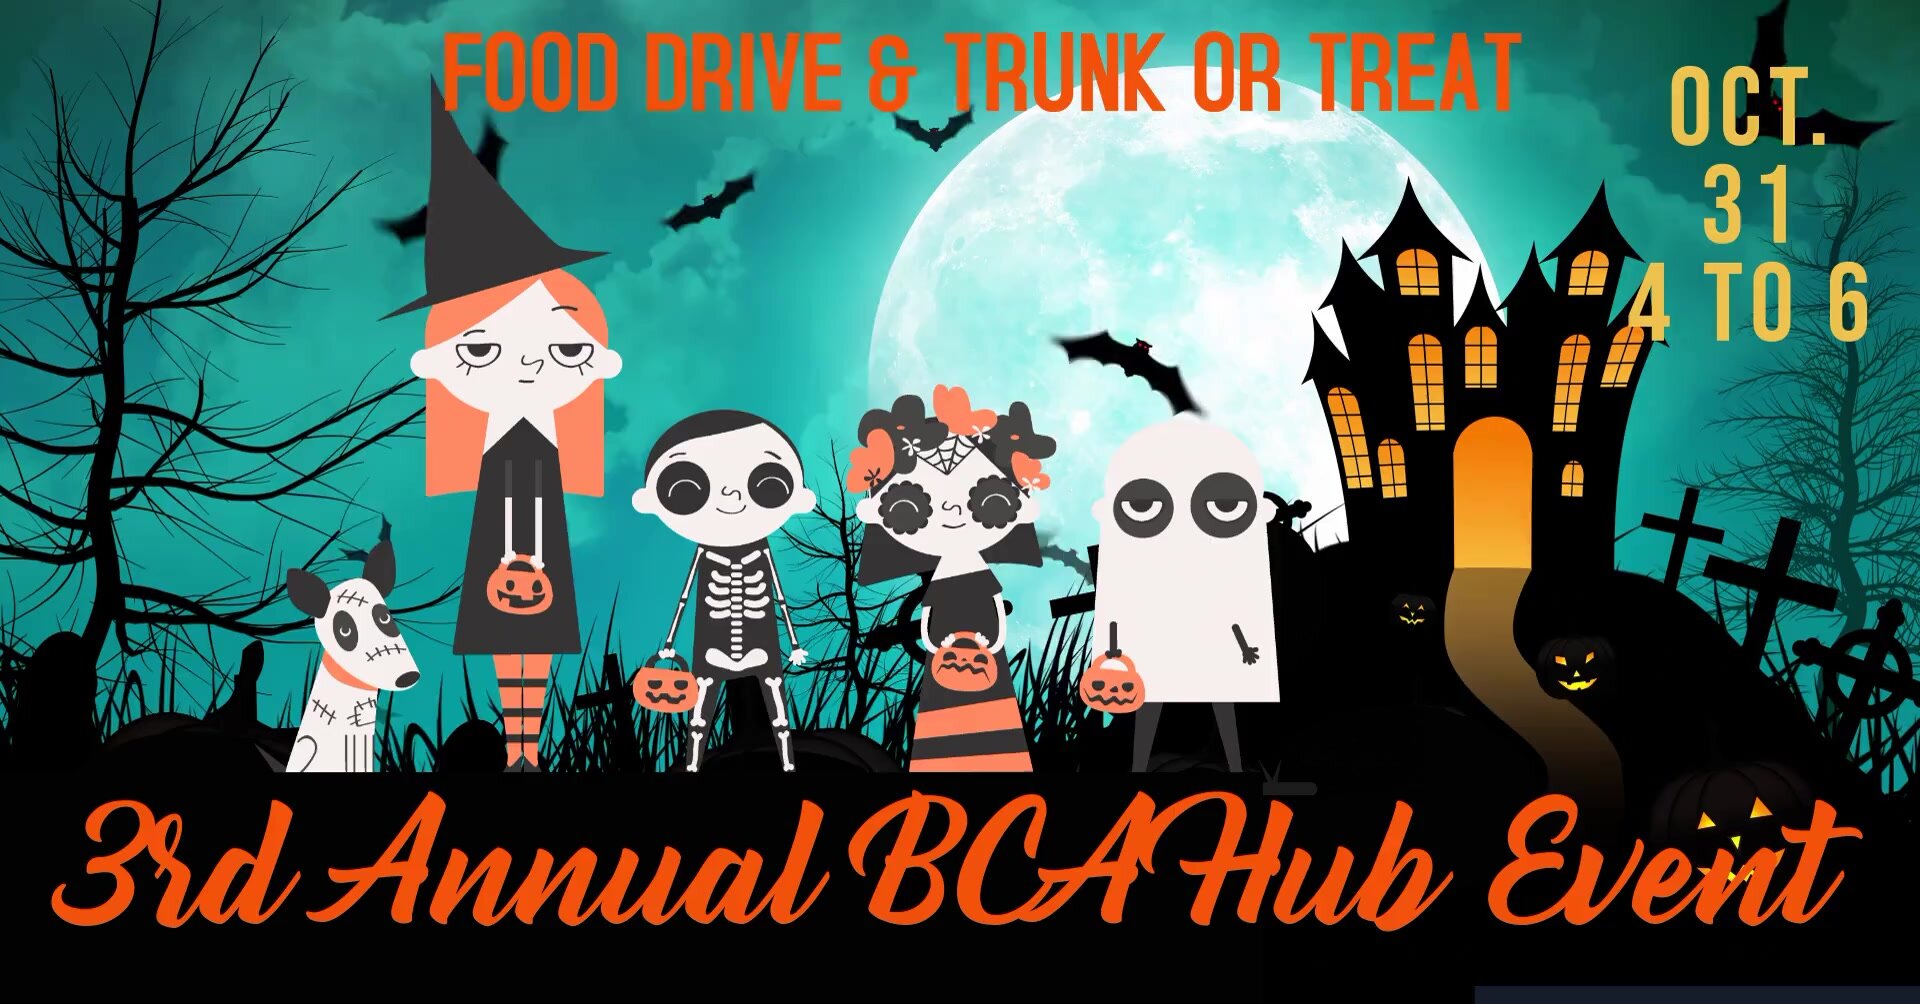 Copy of Facebook cover Halloween video Flyer animated.jpg